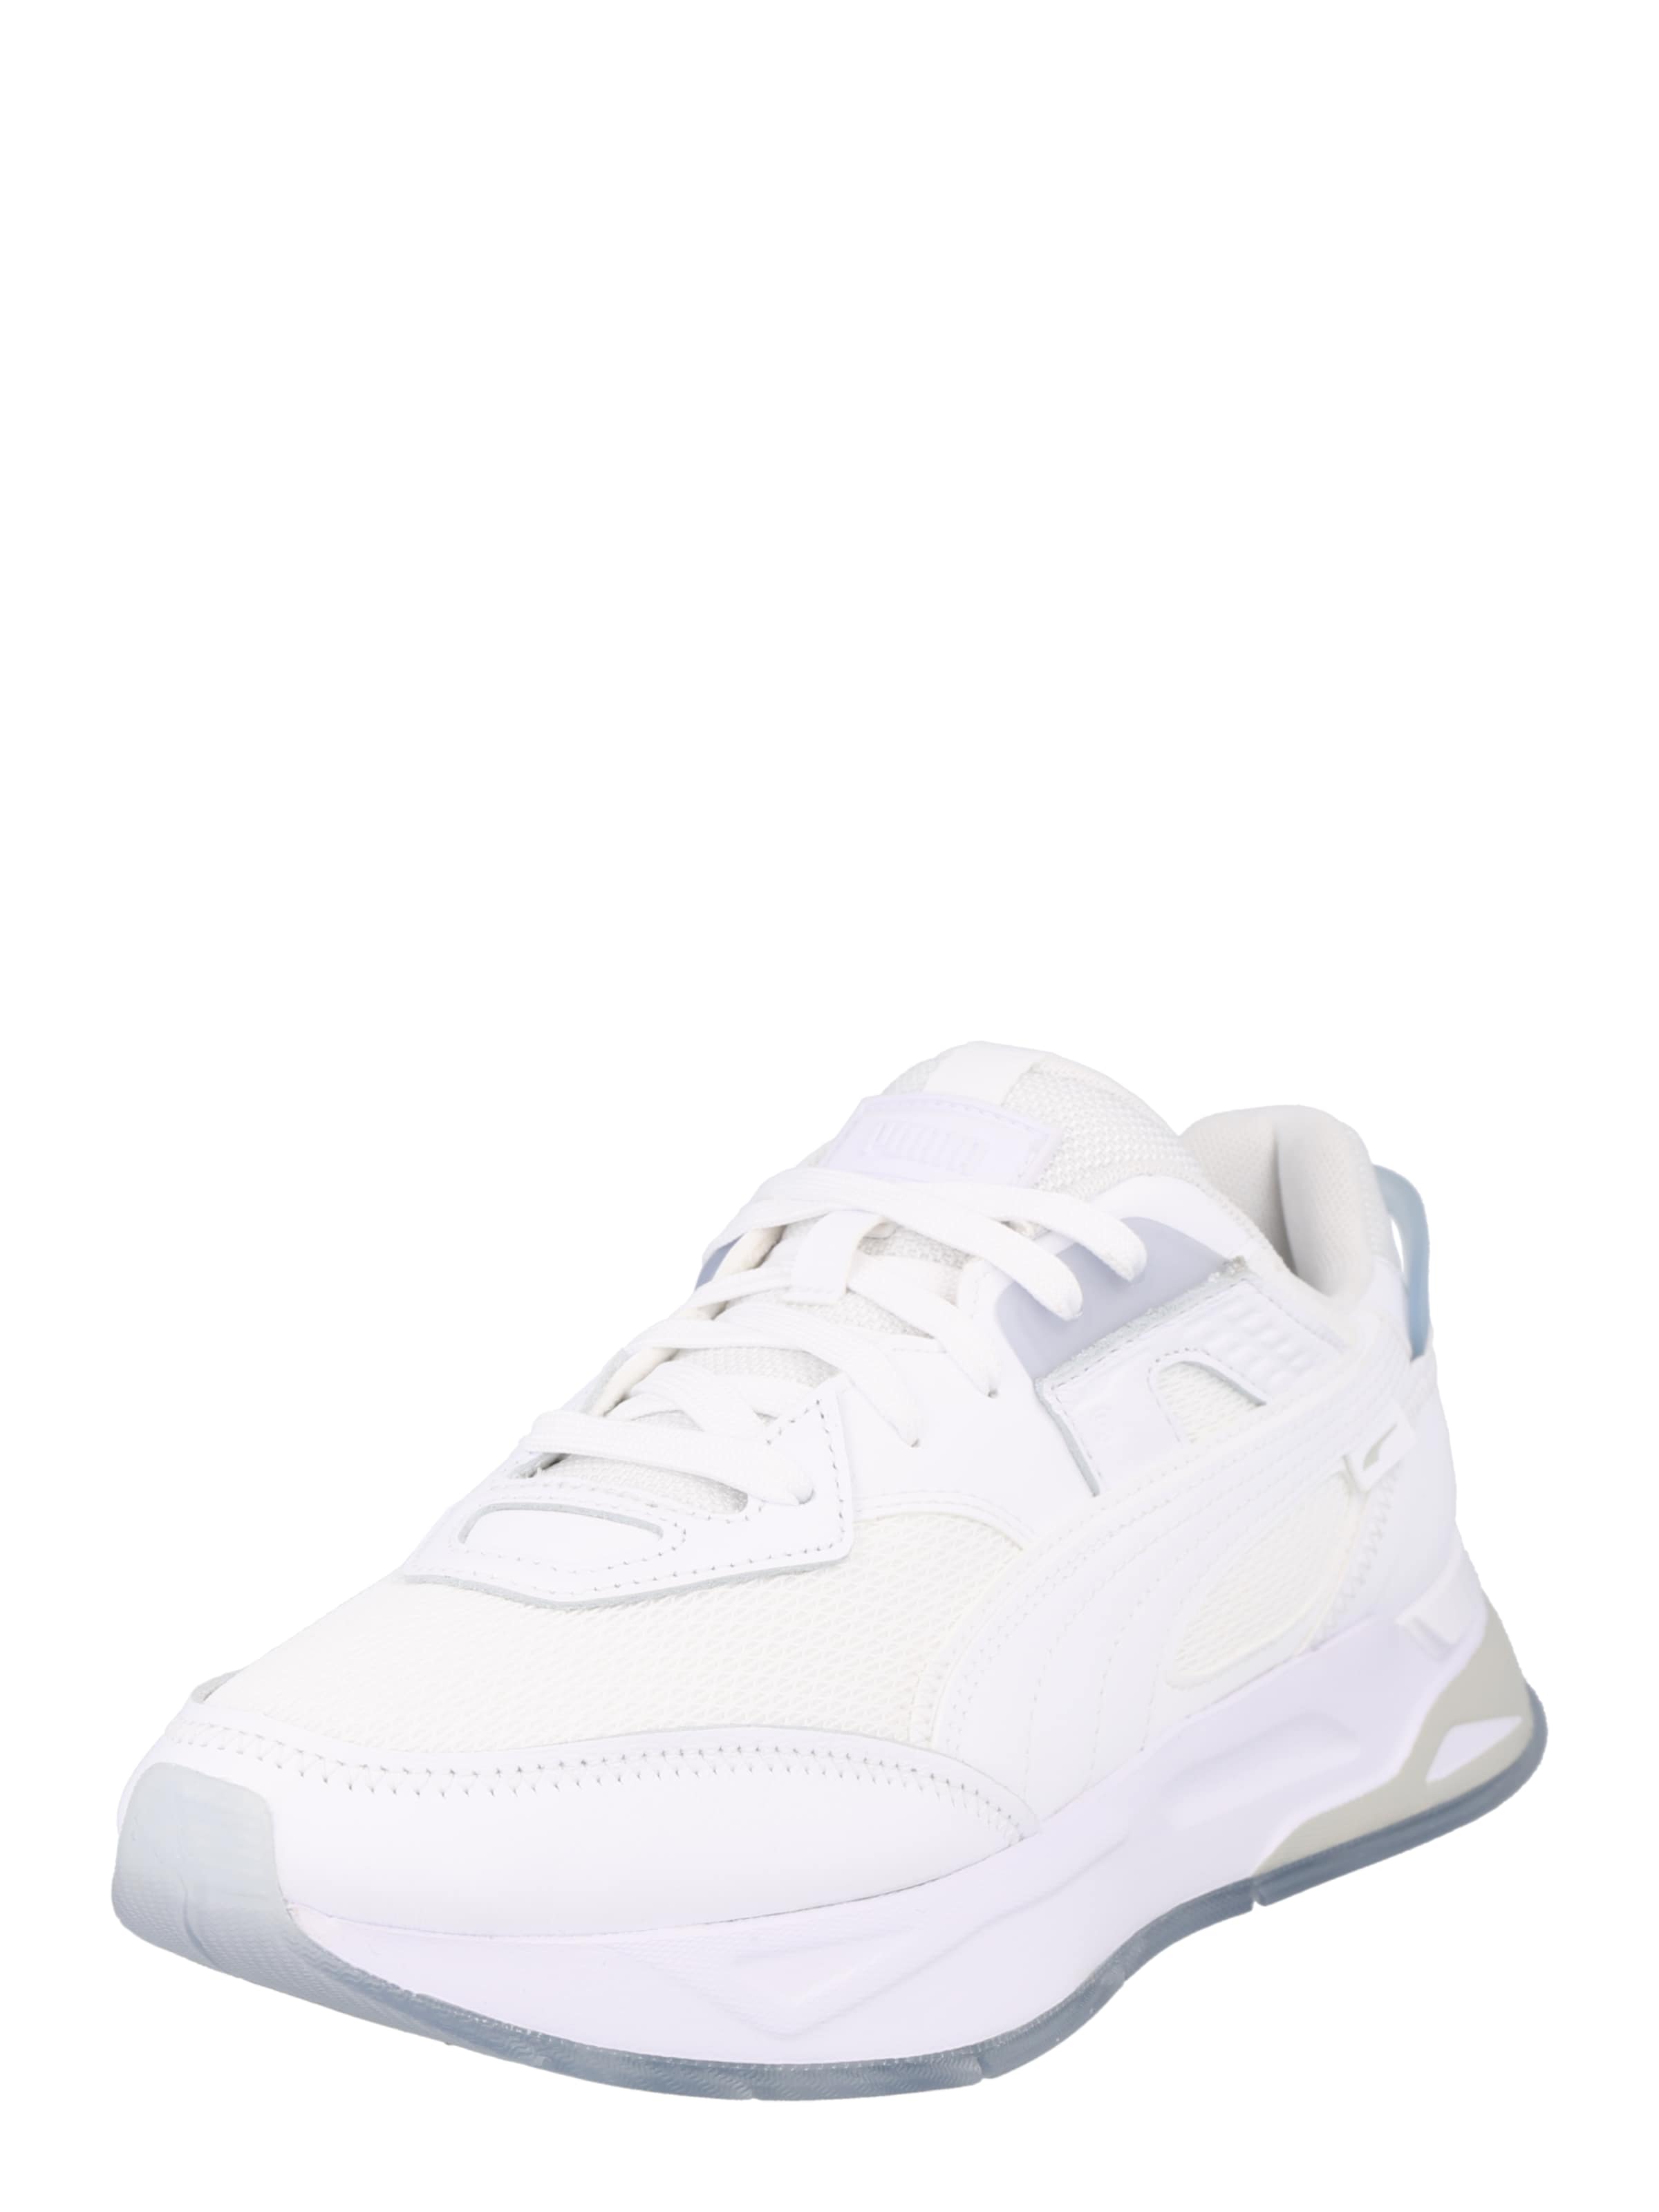 Women Sneakers | PUMA Sneakers 'Mirage' in White - LC00731